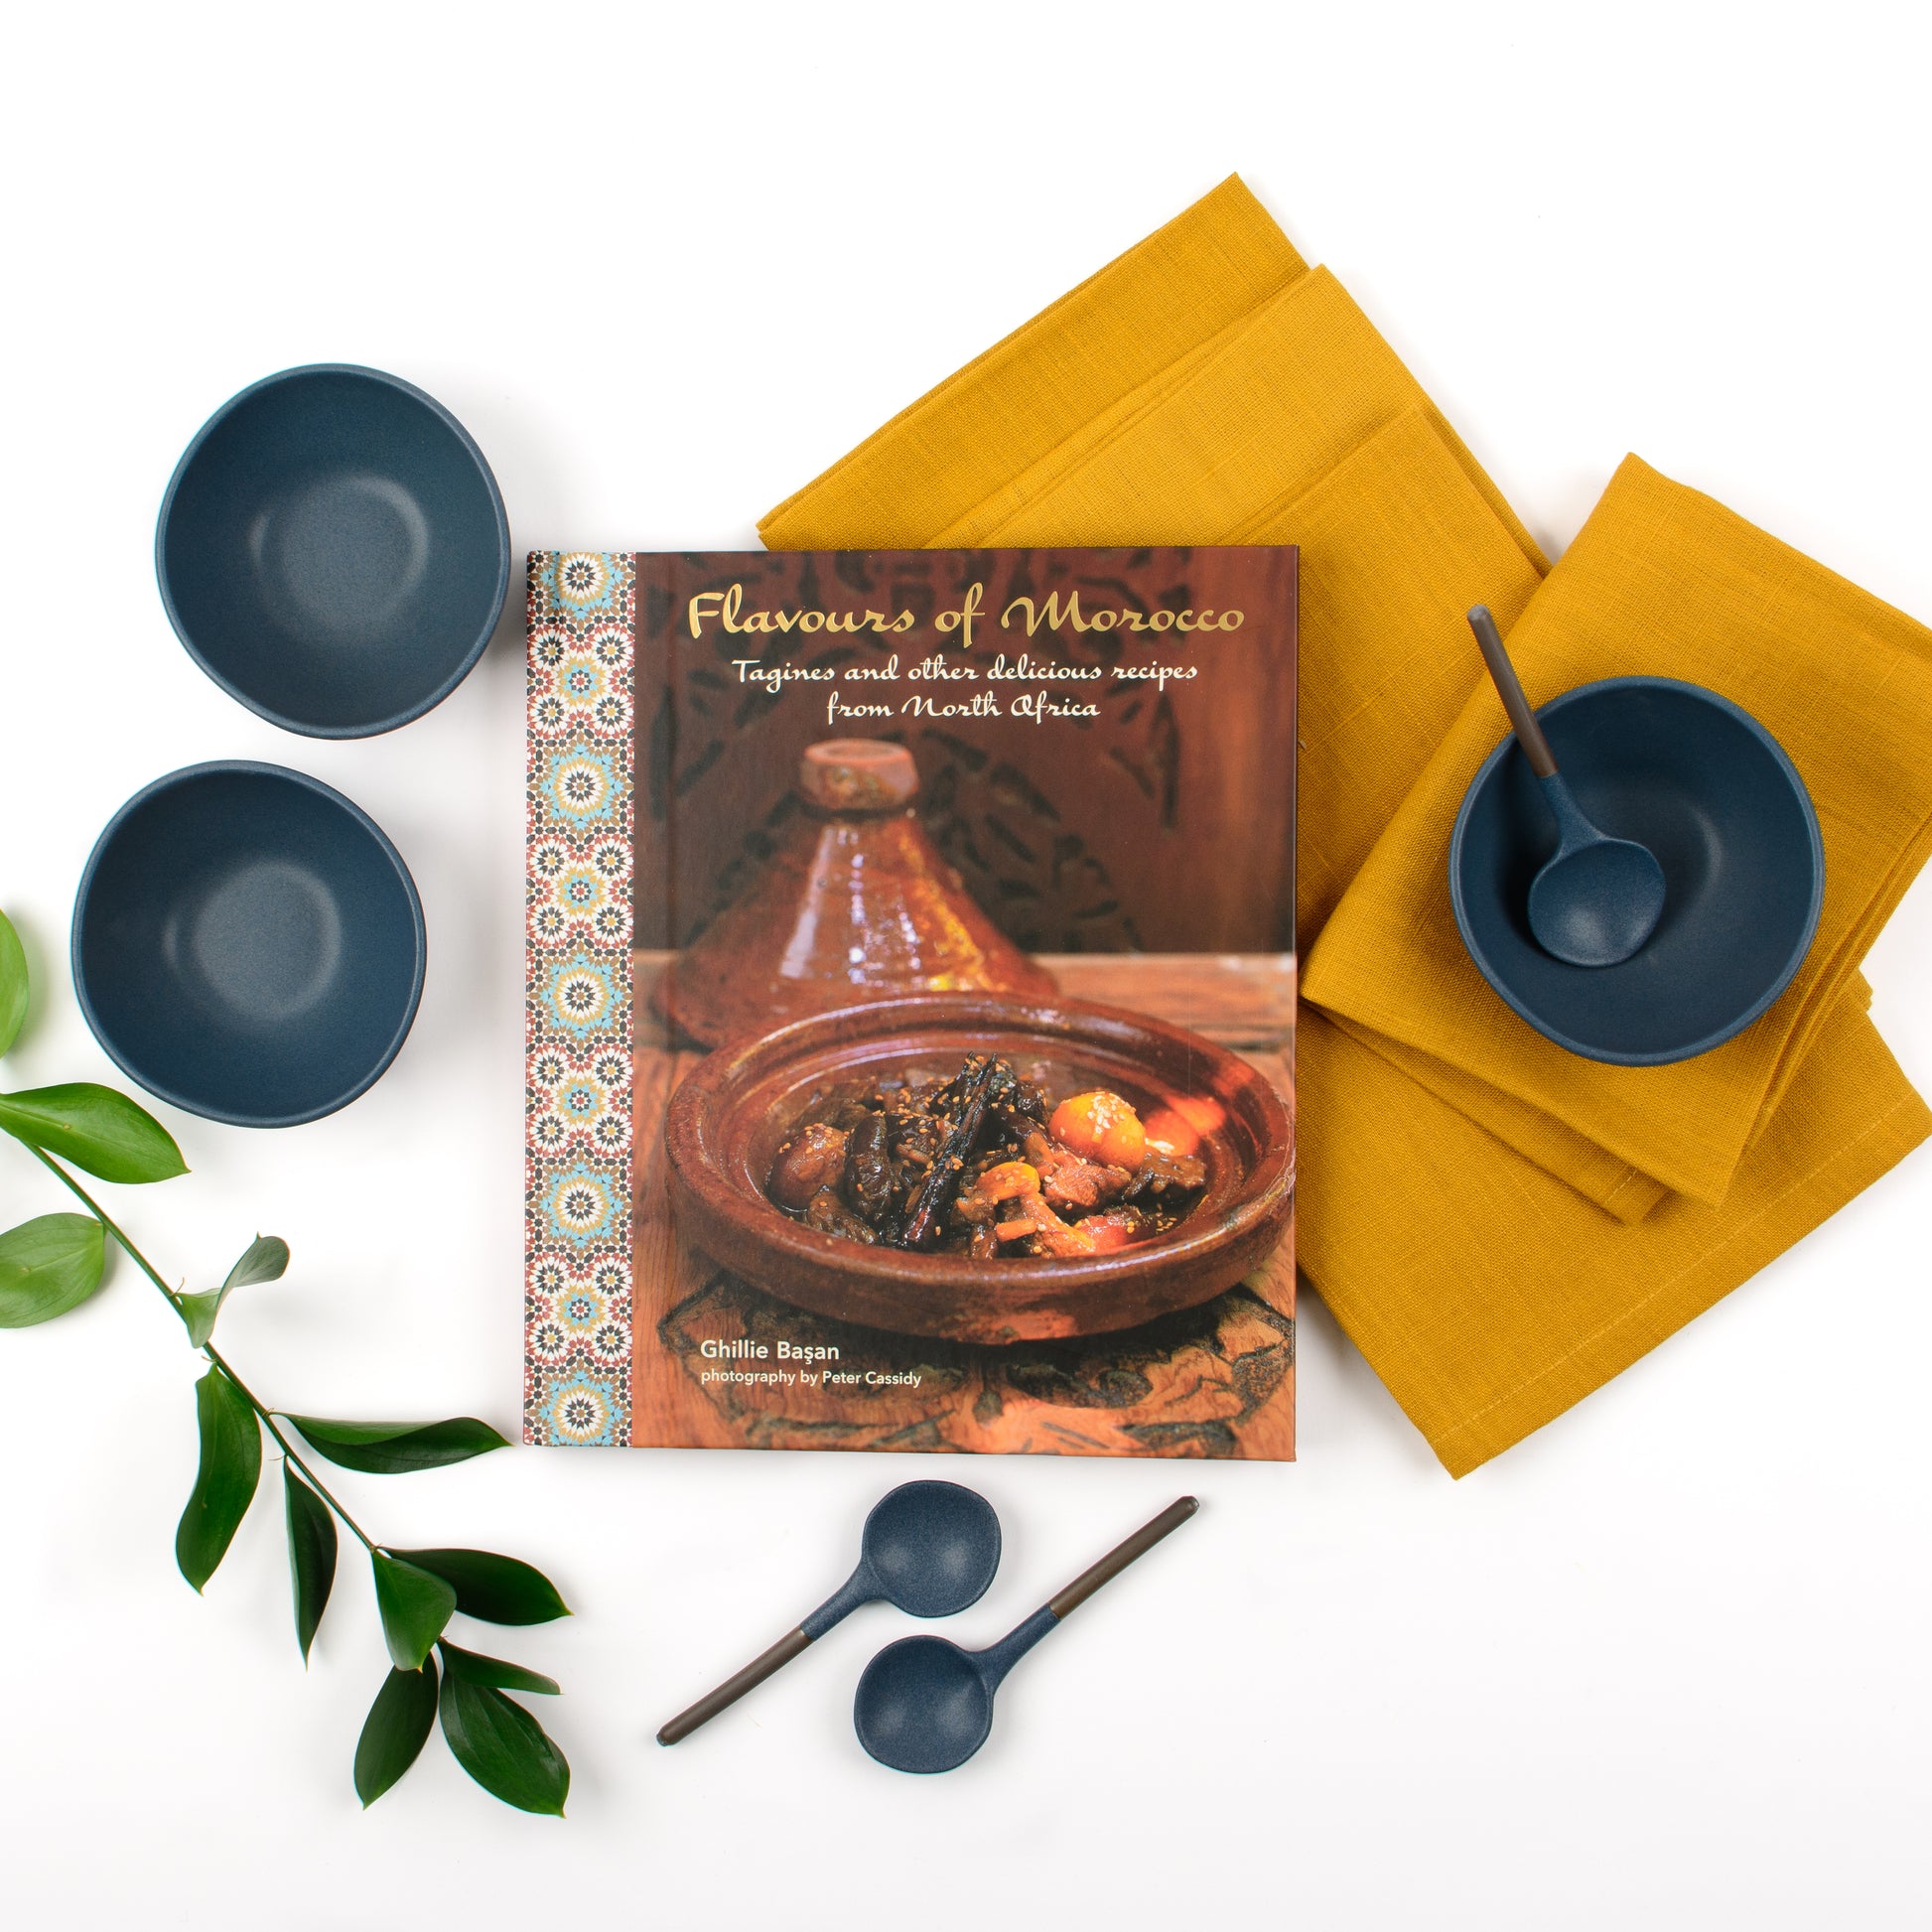 Products displayed out of gift box featuring cookbook, set of linen napkins, three ceramic bowls and matching spoons